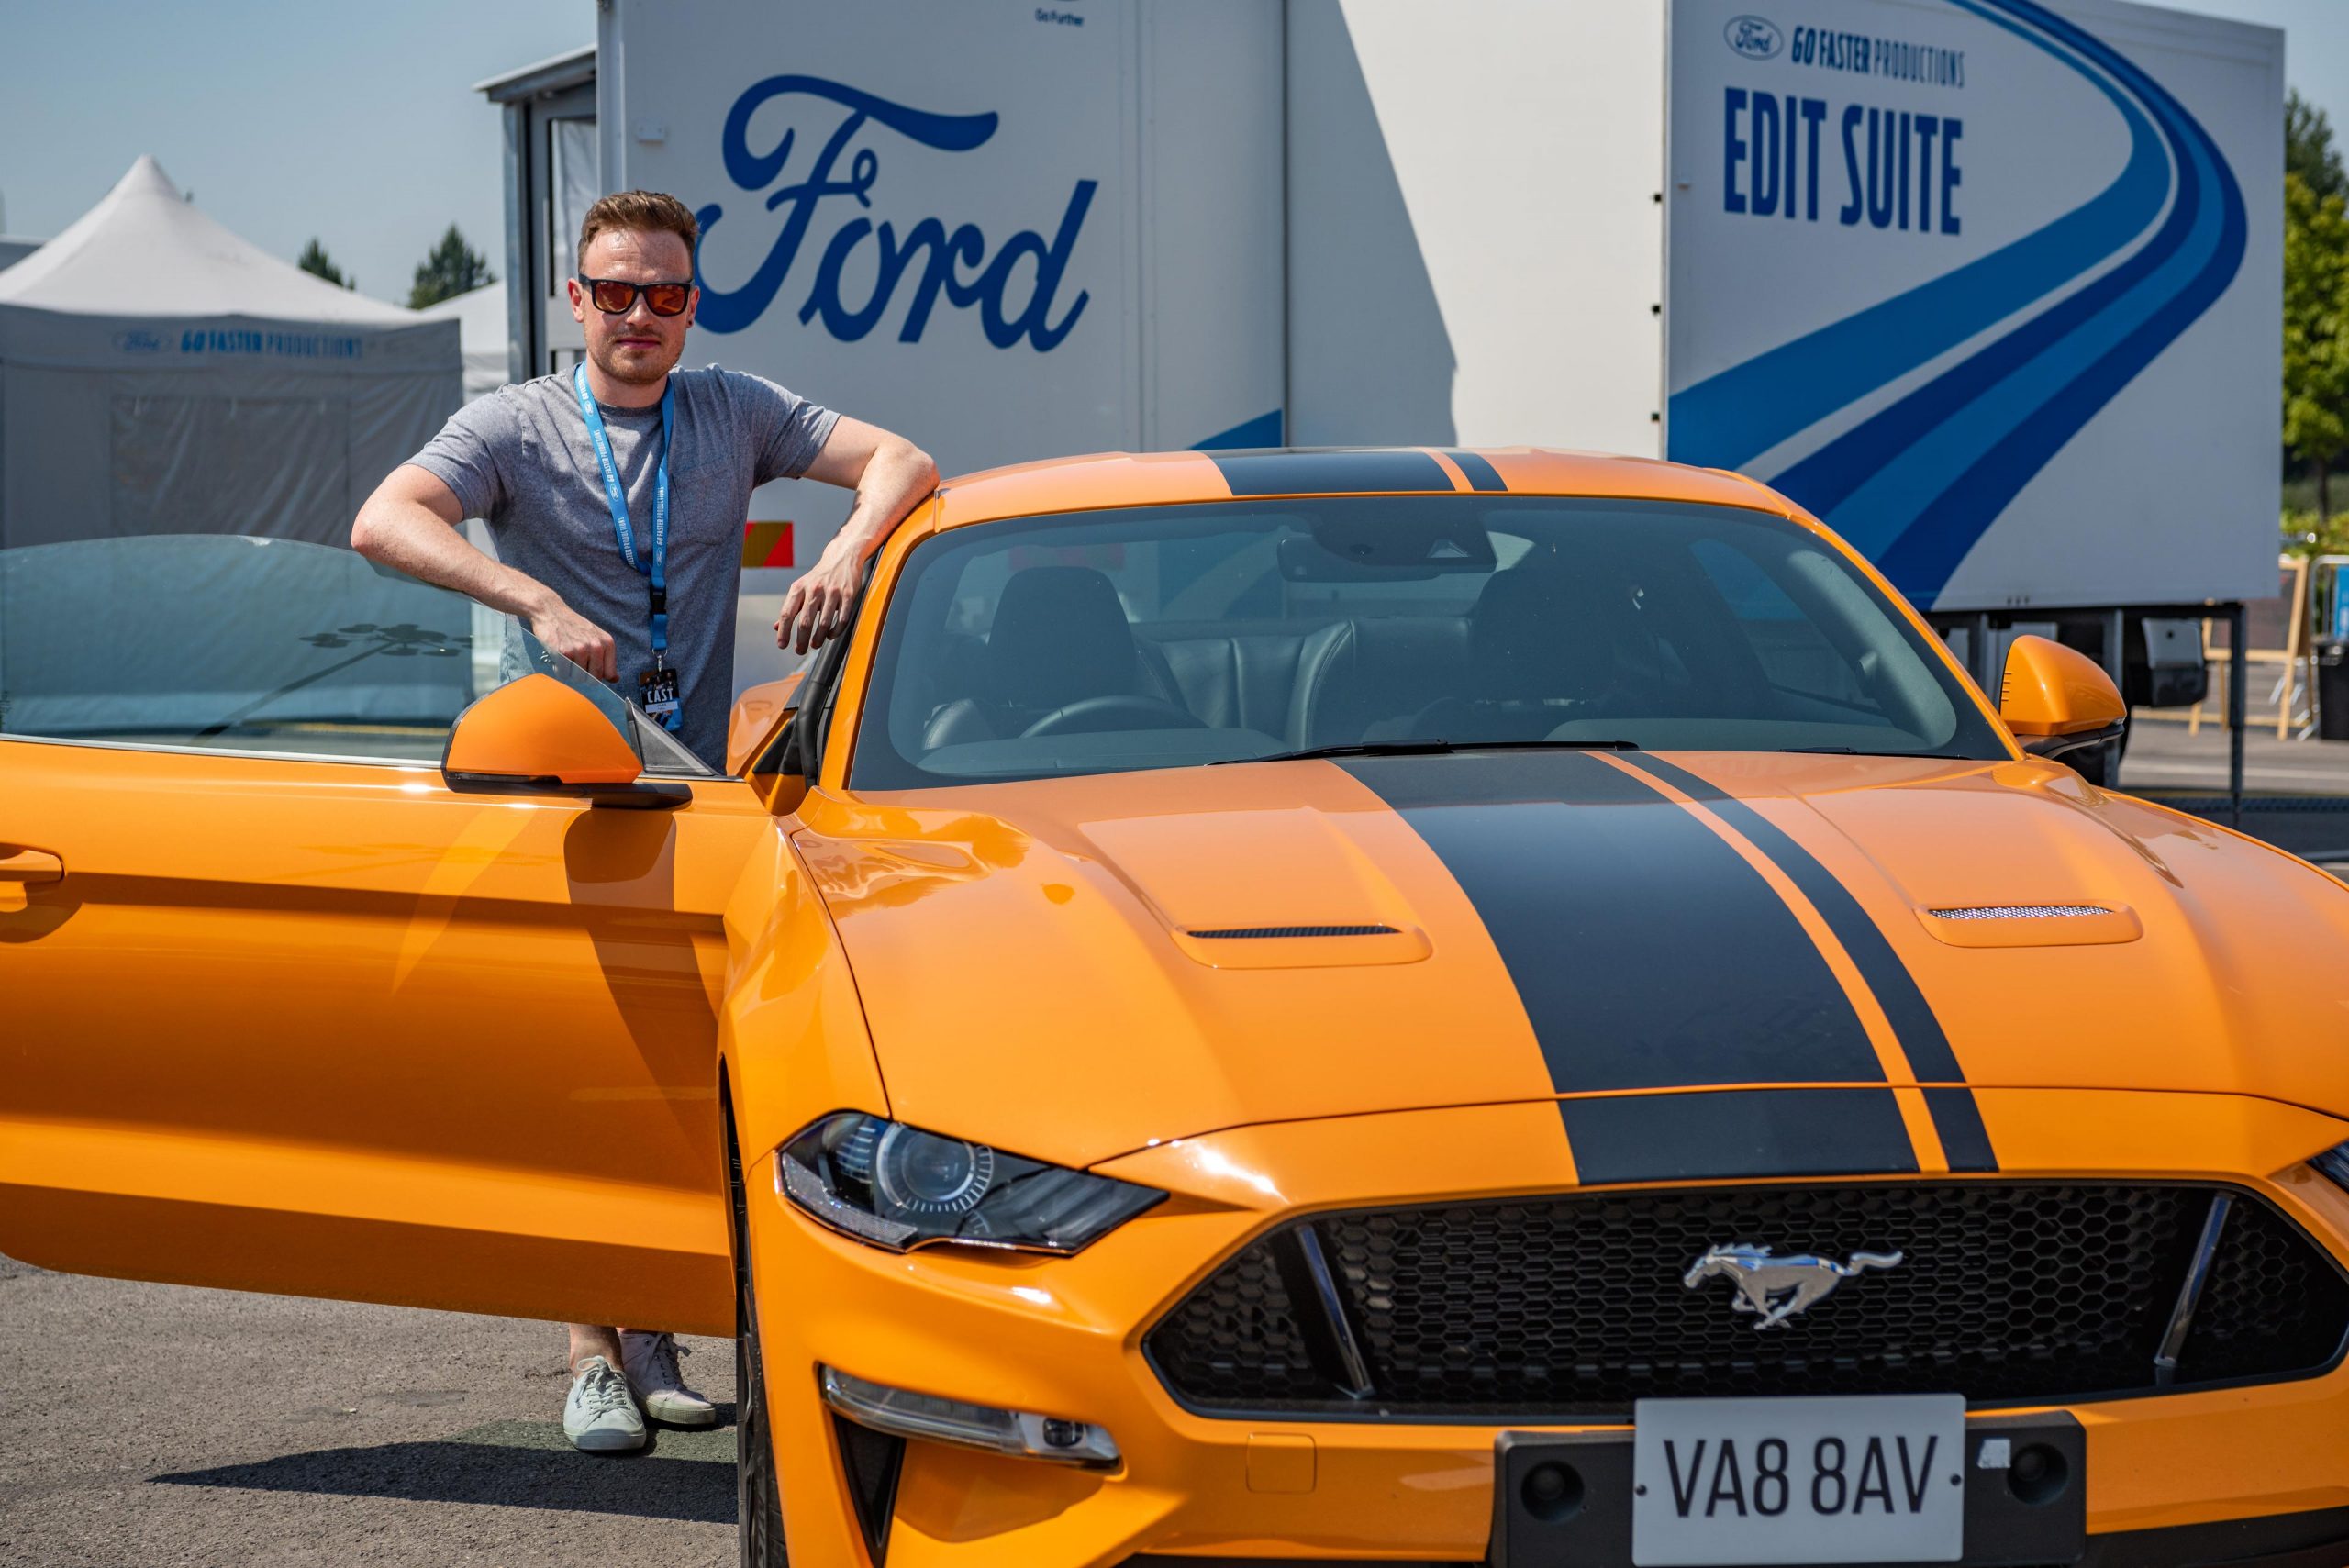 An image captured at a brand event for Ford, featuring a journalist from the press posing next to an orange Mustang. The scene exudes excitement and anticipation as attendees prepare to experience track day thrills, captured in detail by Wright Content.